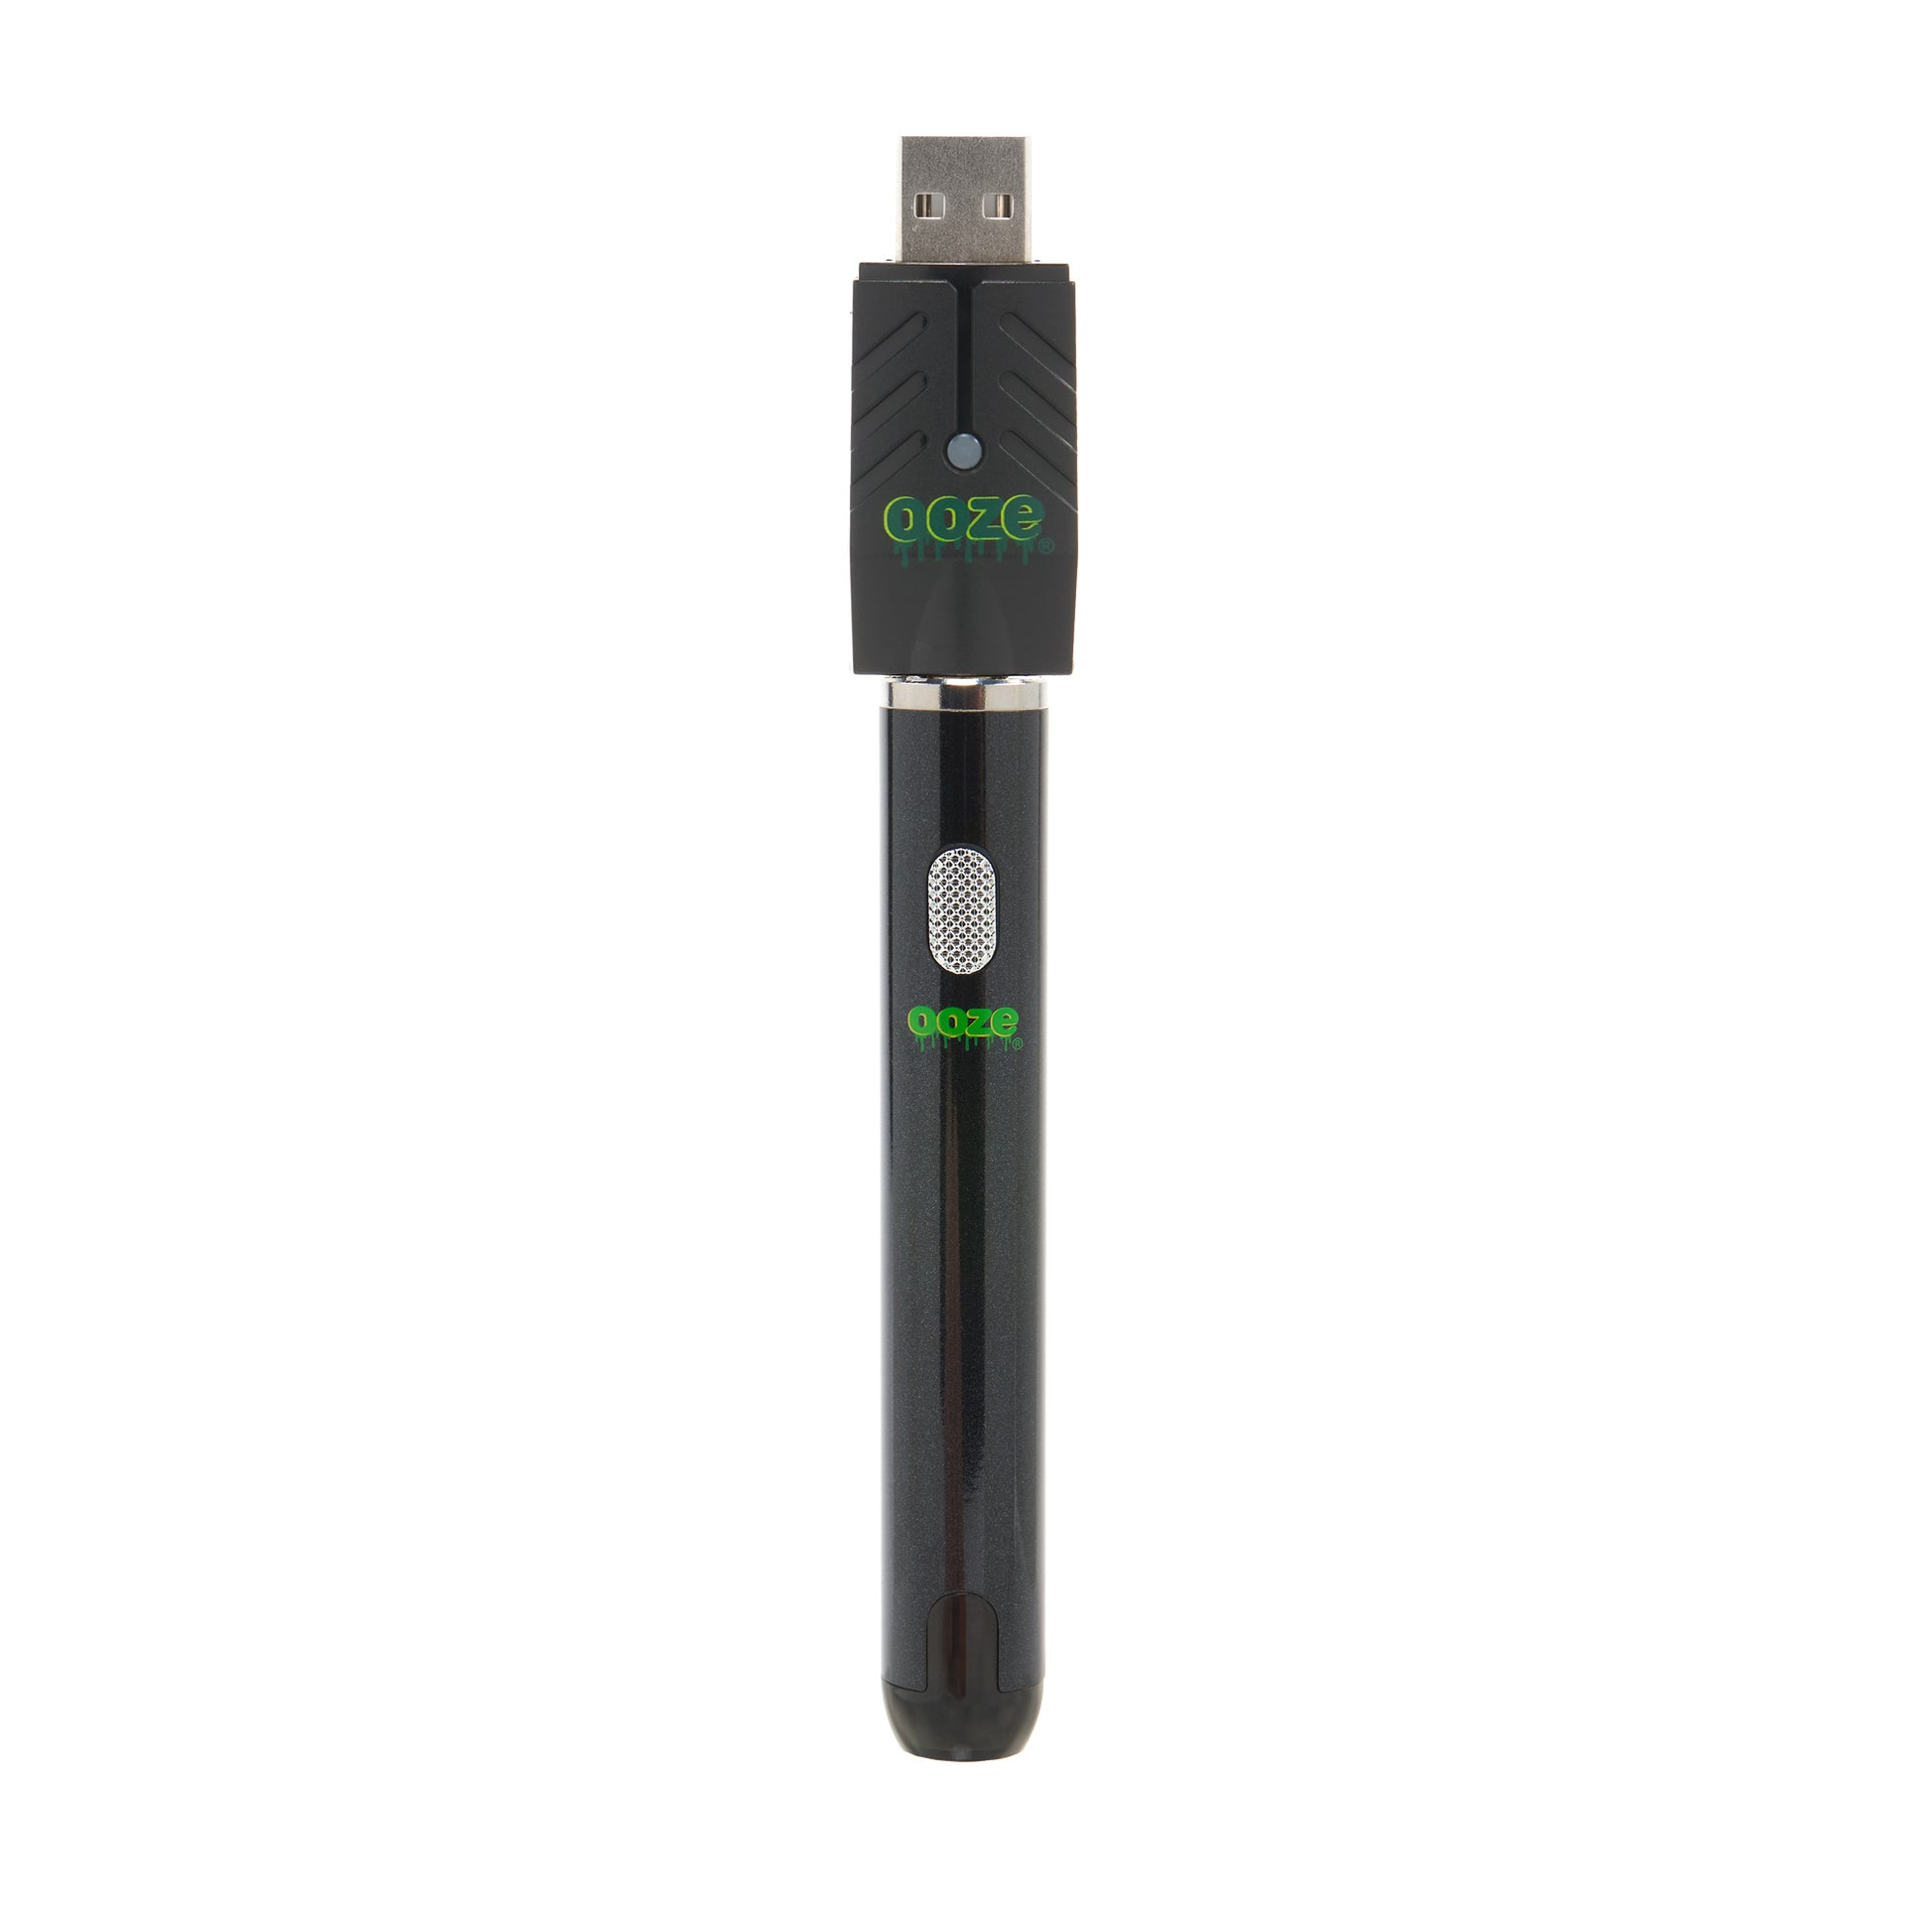 The black Ooze Smart Battery is upright with the charger attached